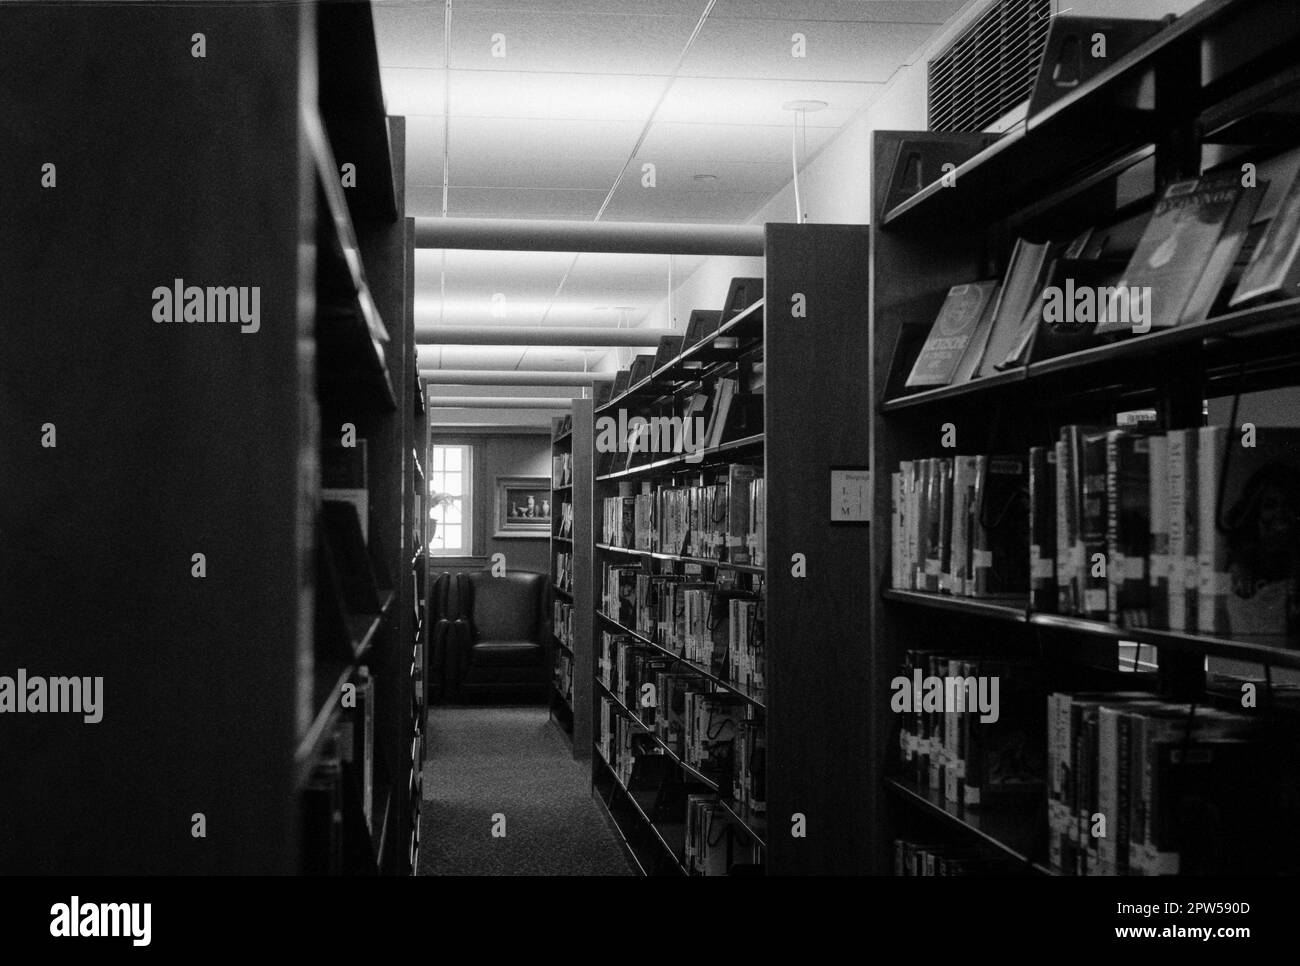 An isle with bookshelves on either side  in the Lucius Beebe Memorial Library. Wakefield, Massachusetts. The image was captured on analog black and wh Stock Photo